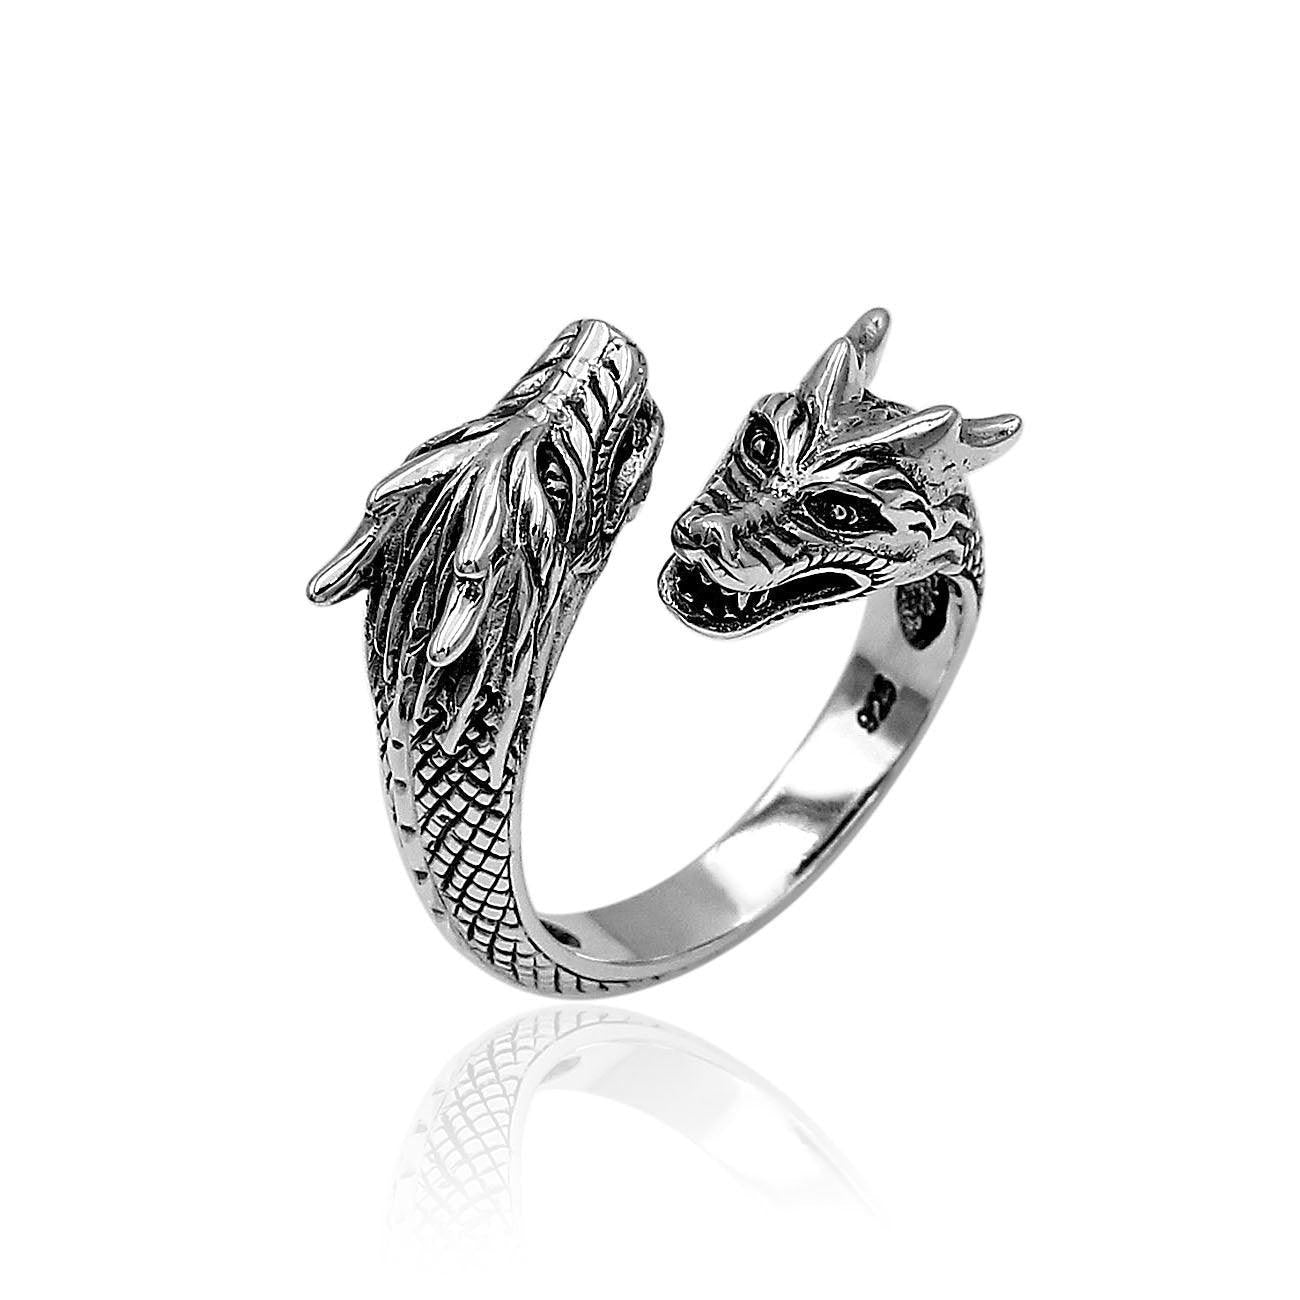 Designer Handmade BALI DRAGON Cocktail Ring in 925 Sterling Silver - Size L , M , N , O , P , Q - Inspiring Jewellery